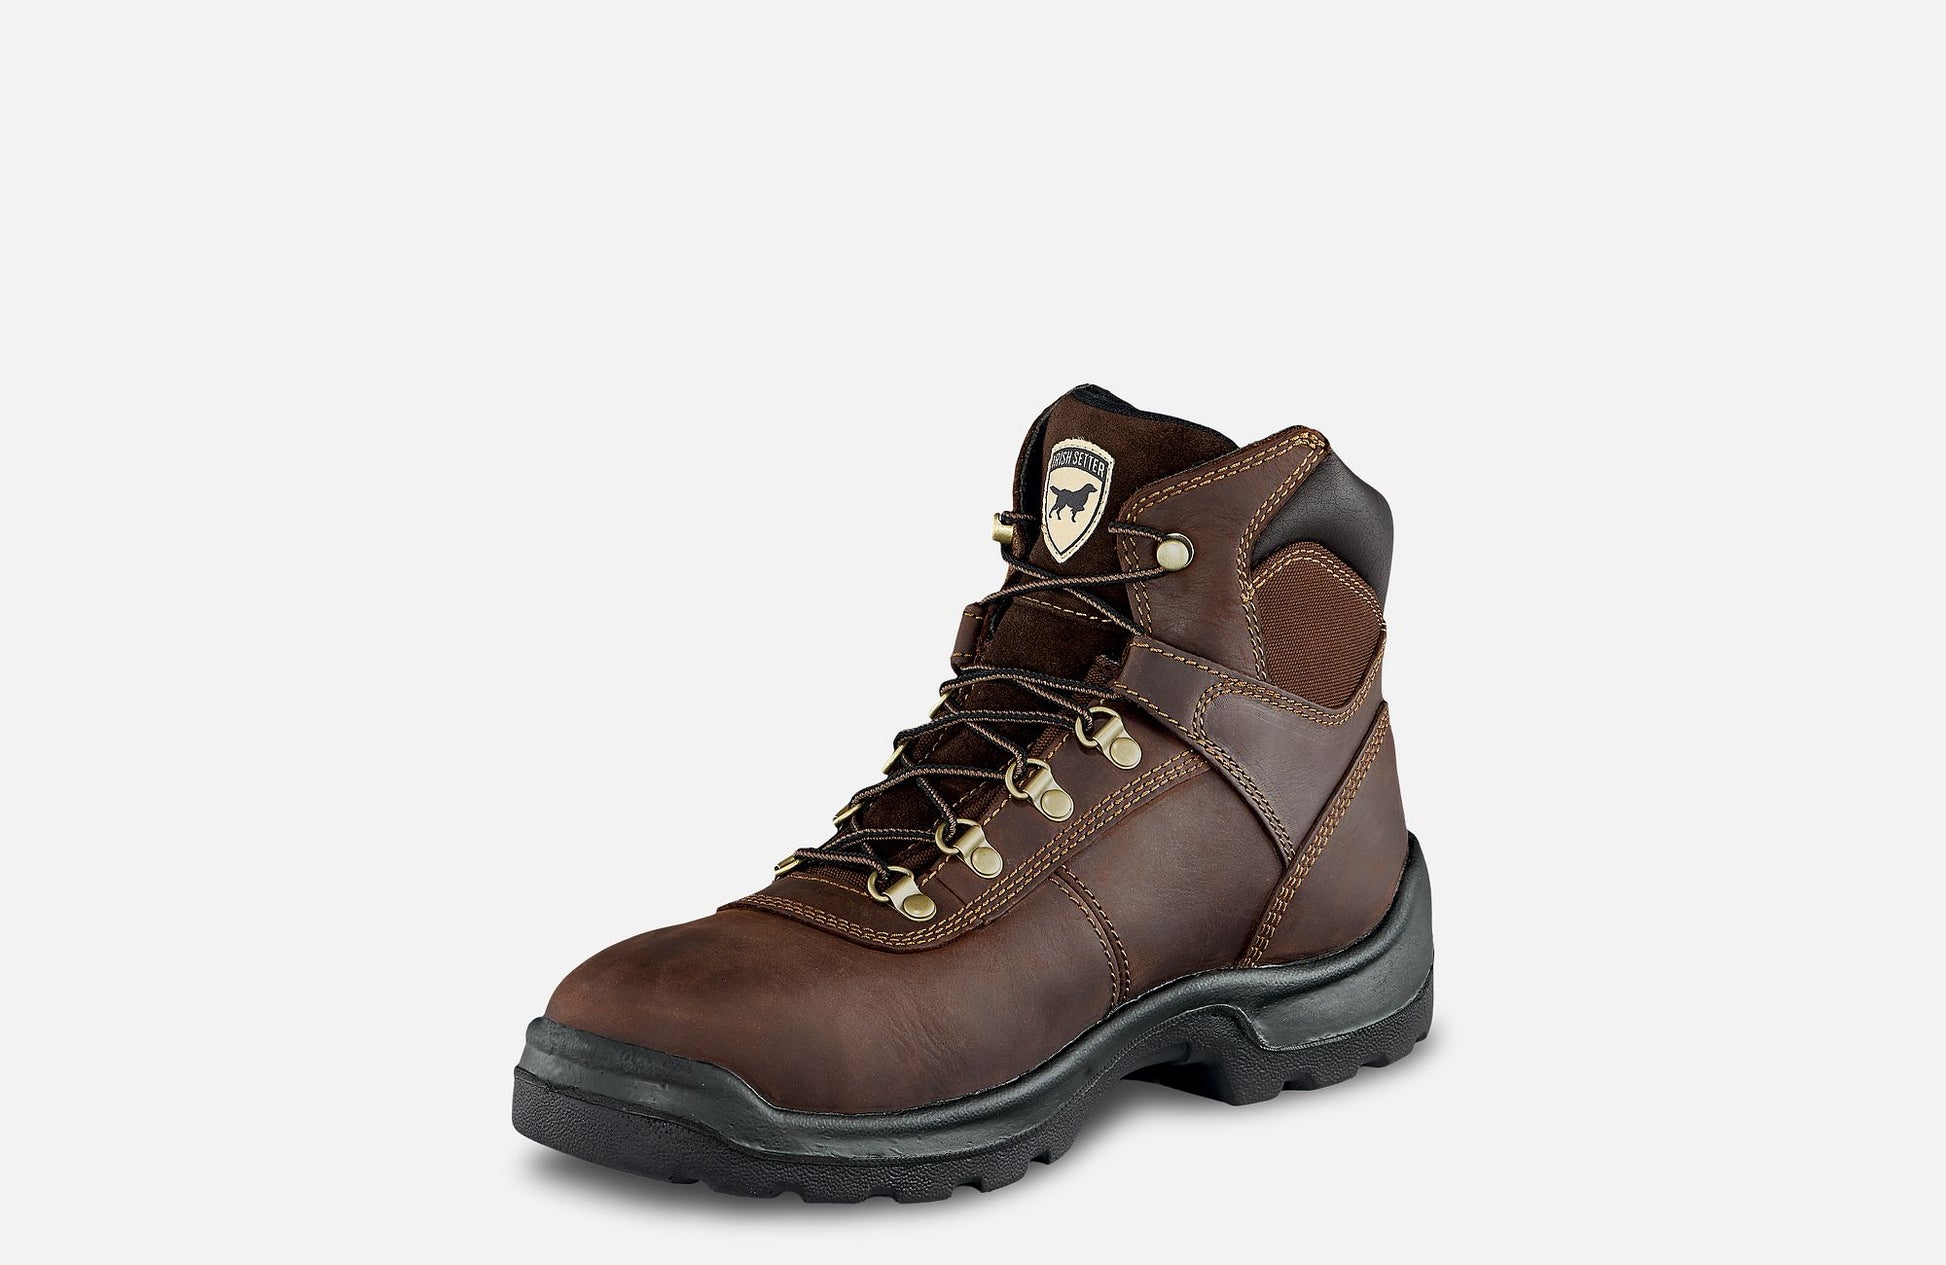 IRISH SETTER ELY 6-INCH WATERPROOF LEATHER SAFETY TOE BOOT - MEN'S